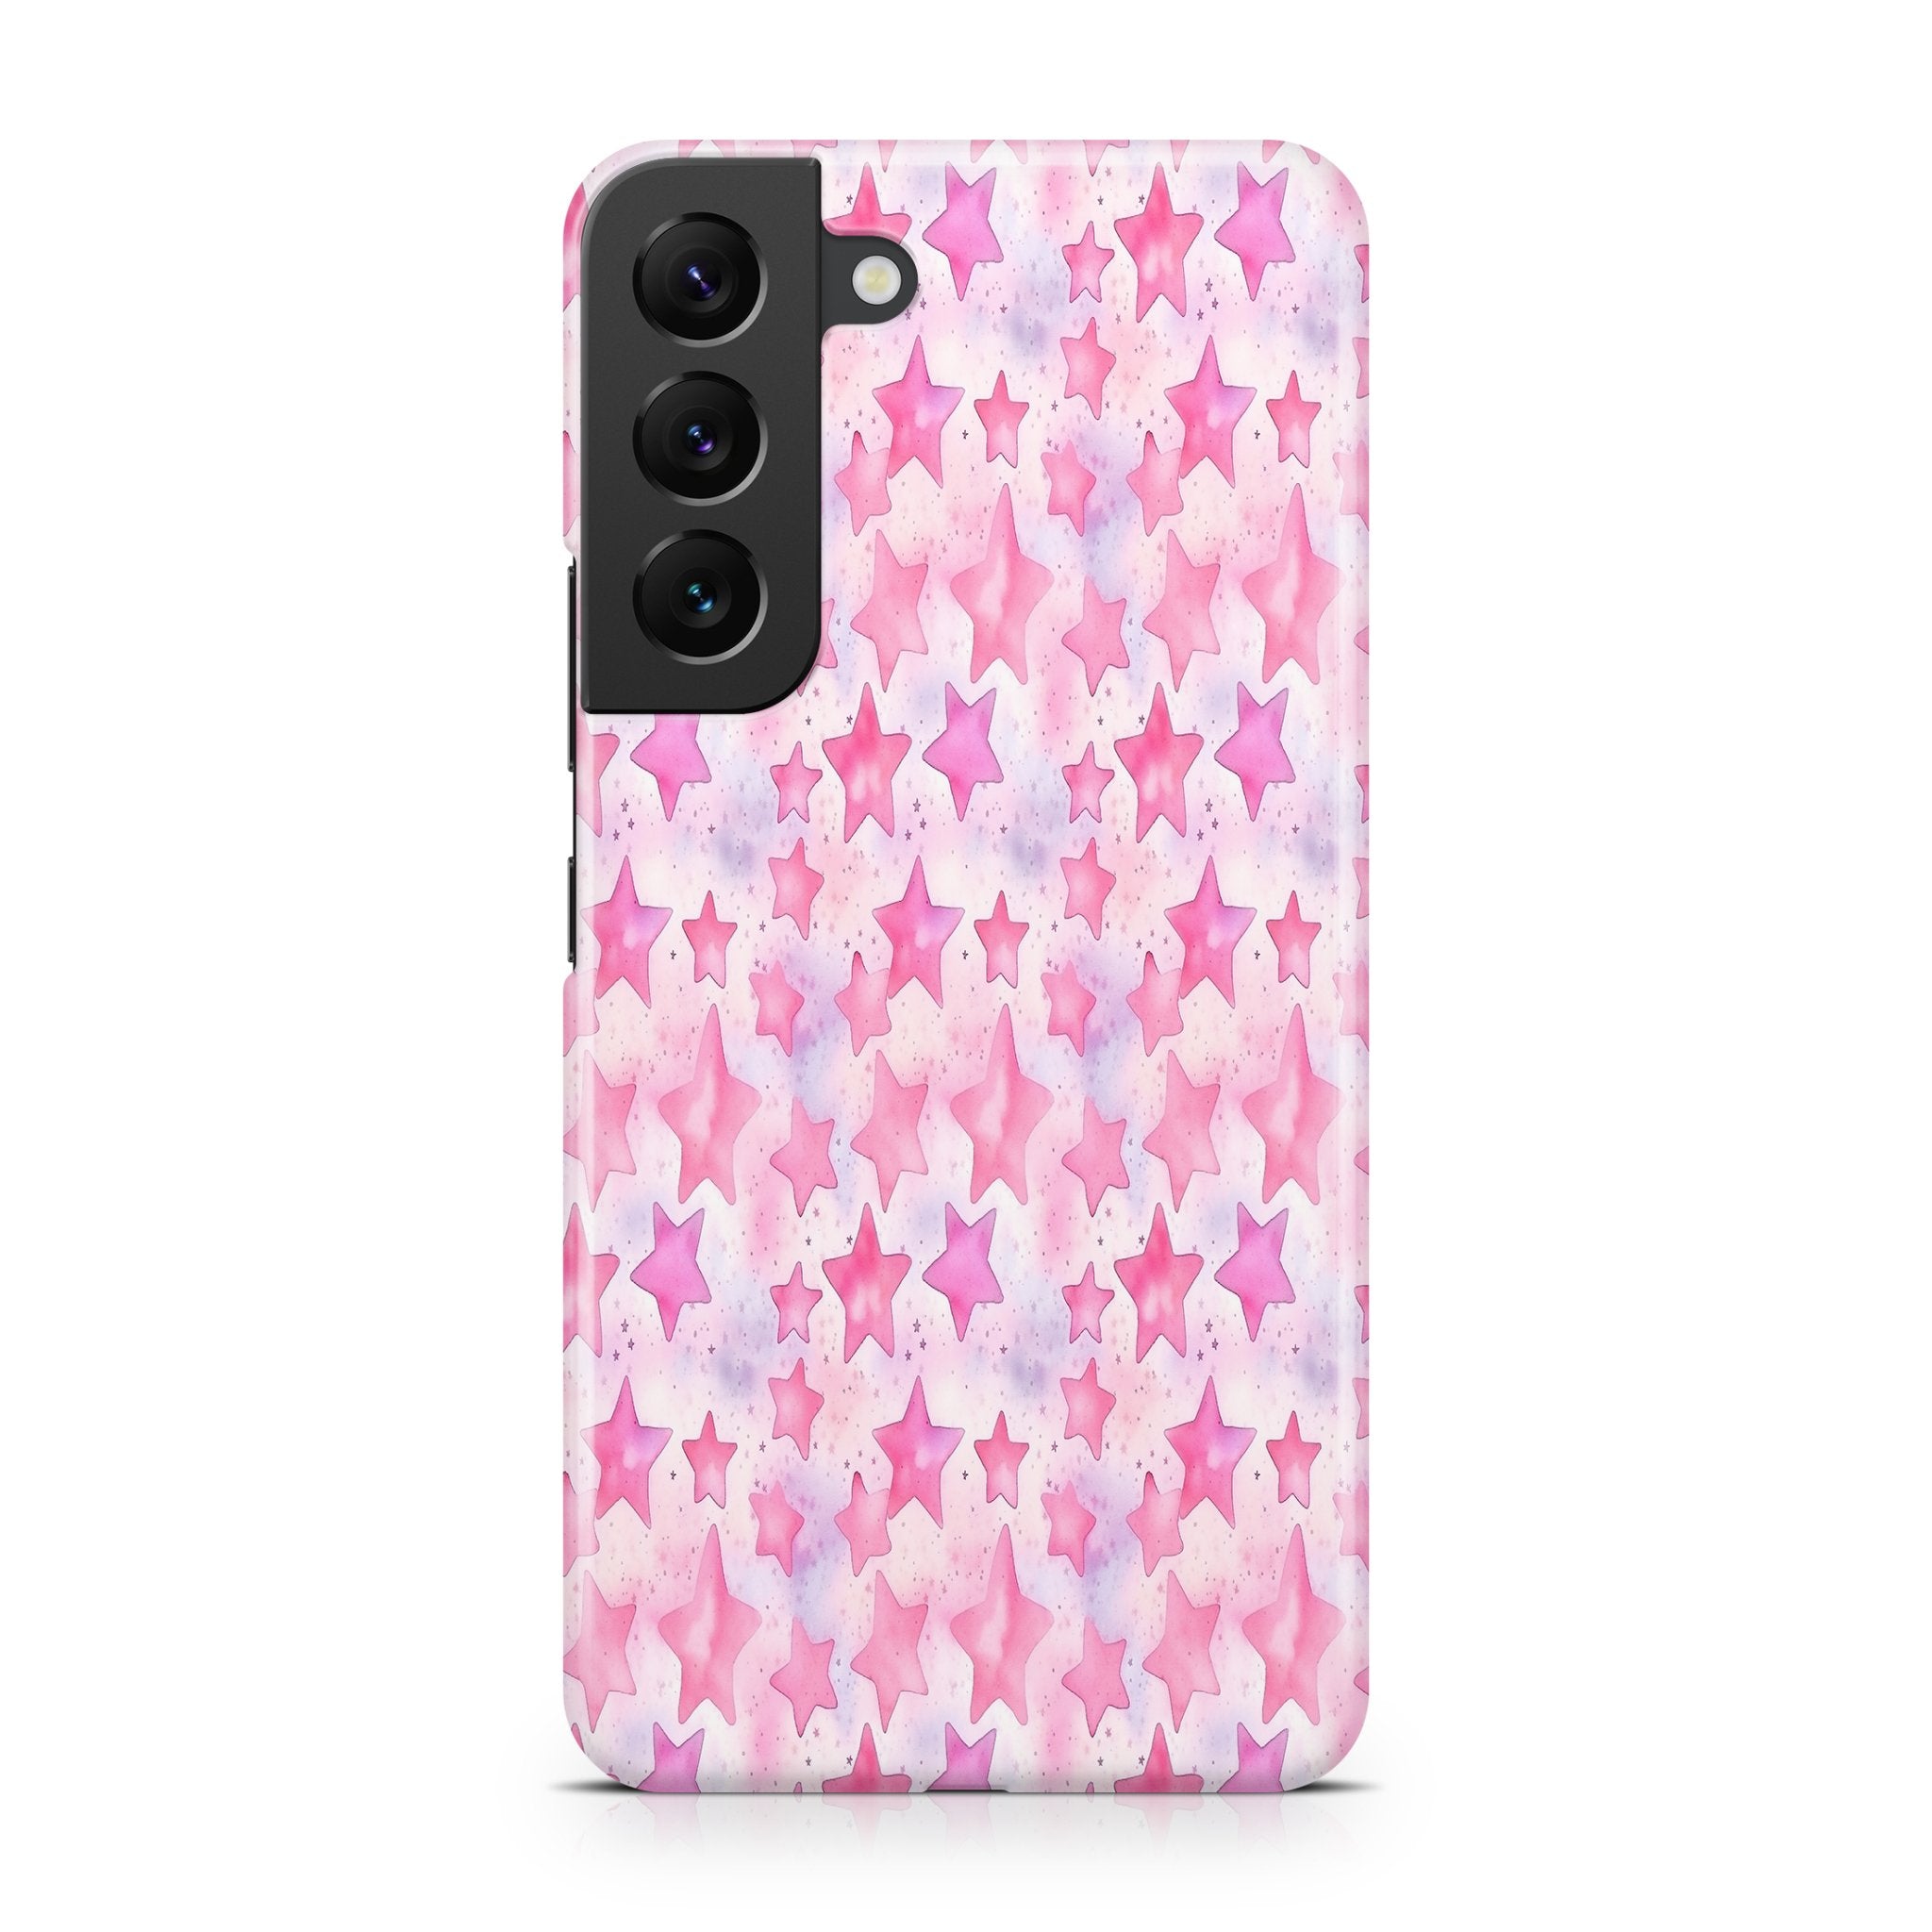 Pink Star - Samsung phone case designs by CaseSwagger